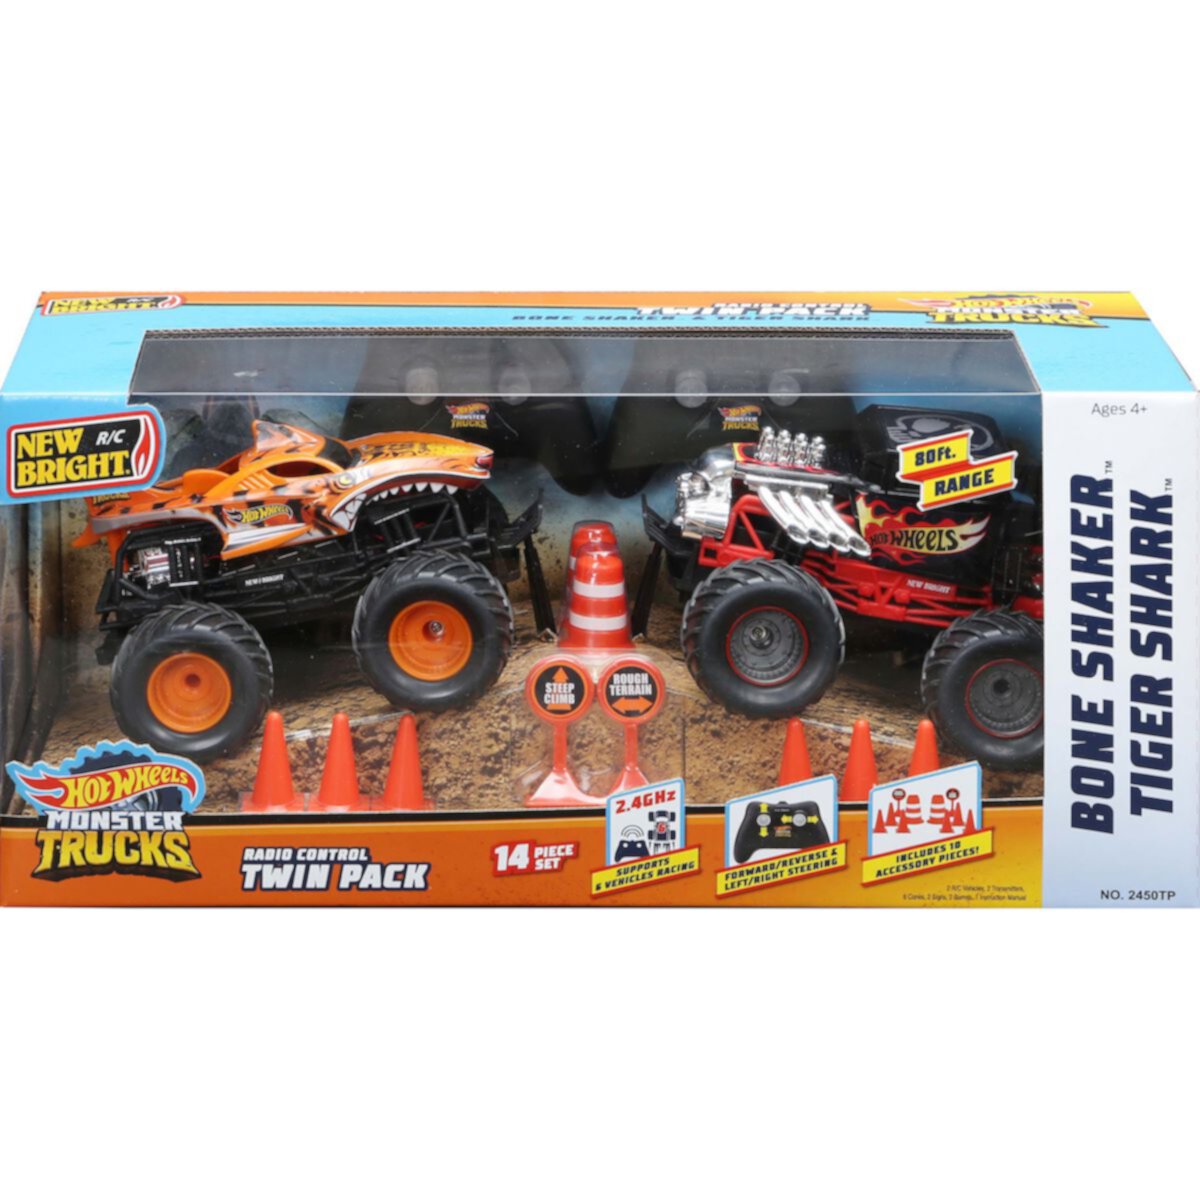 New Bright 1:24 RC Hot Wheels Monster Truck Twin-Pack: Bone Shaker and Tiger Shark New Bright